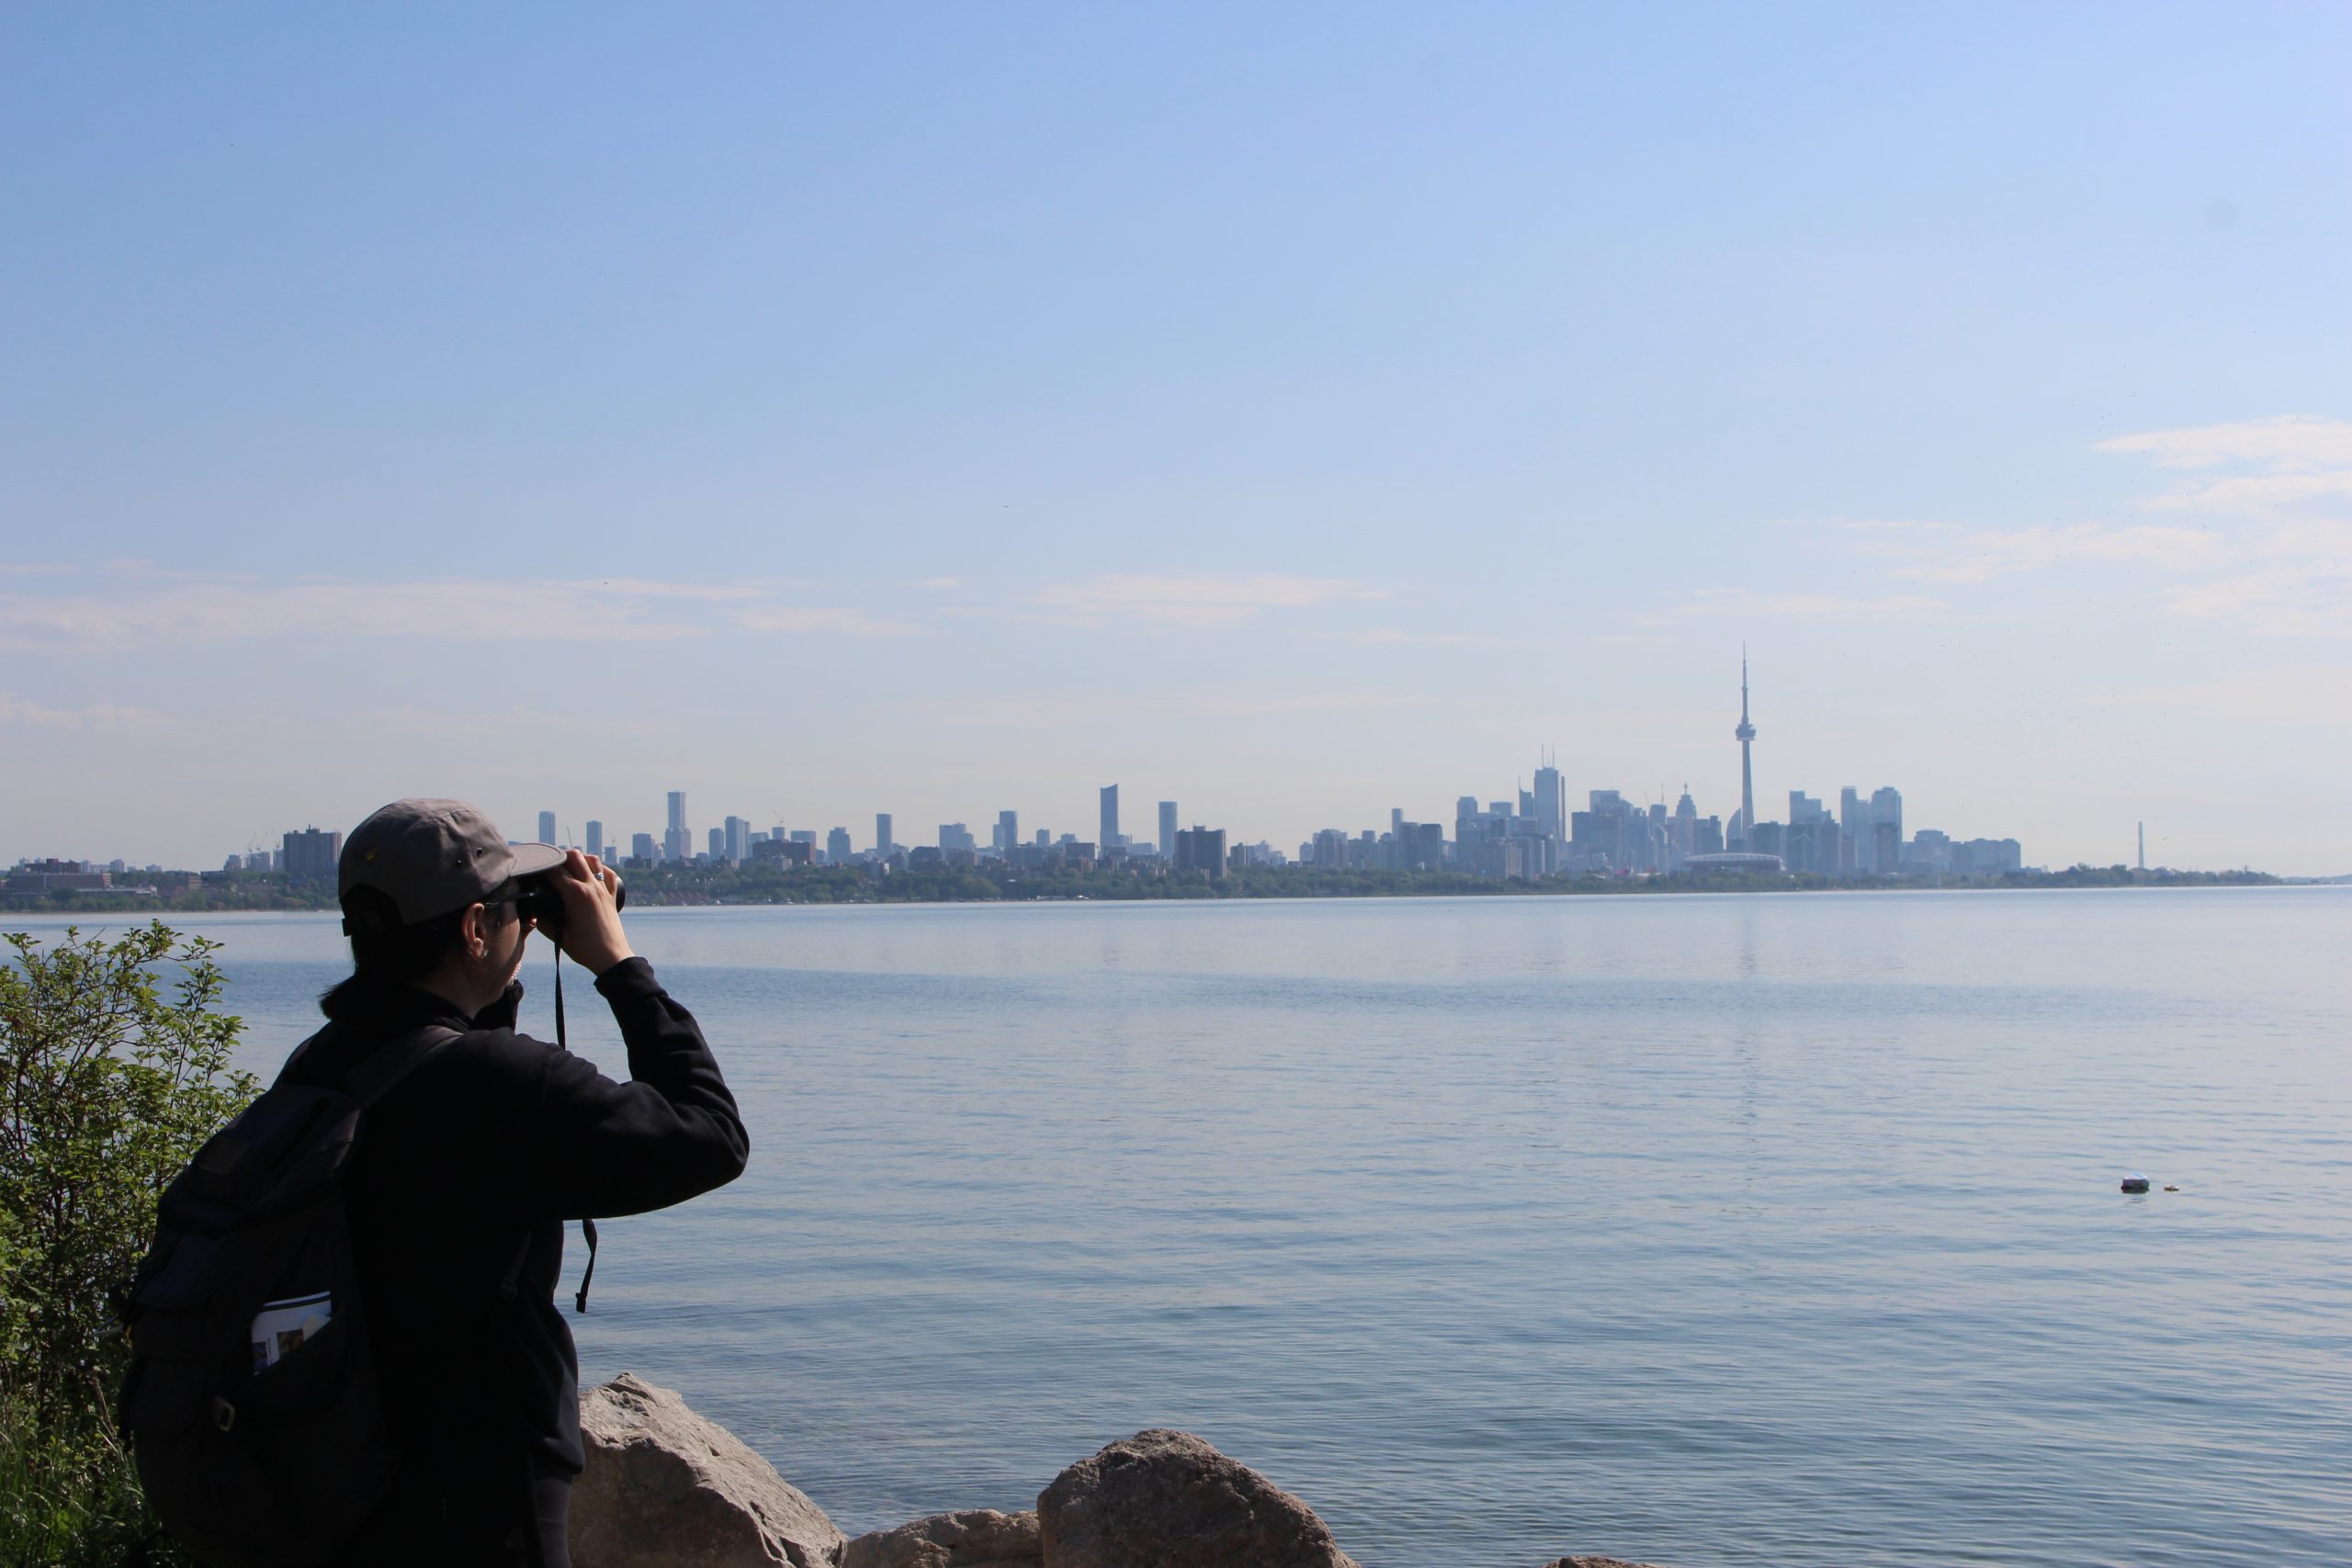 A person looks out across the water to Toronto's skyline.